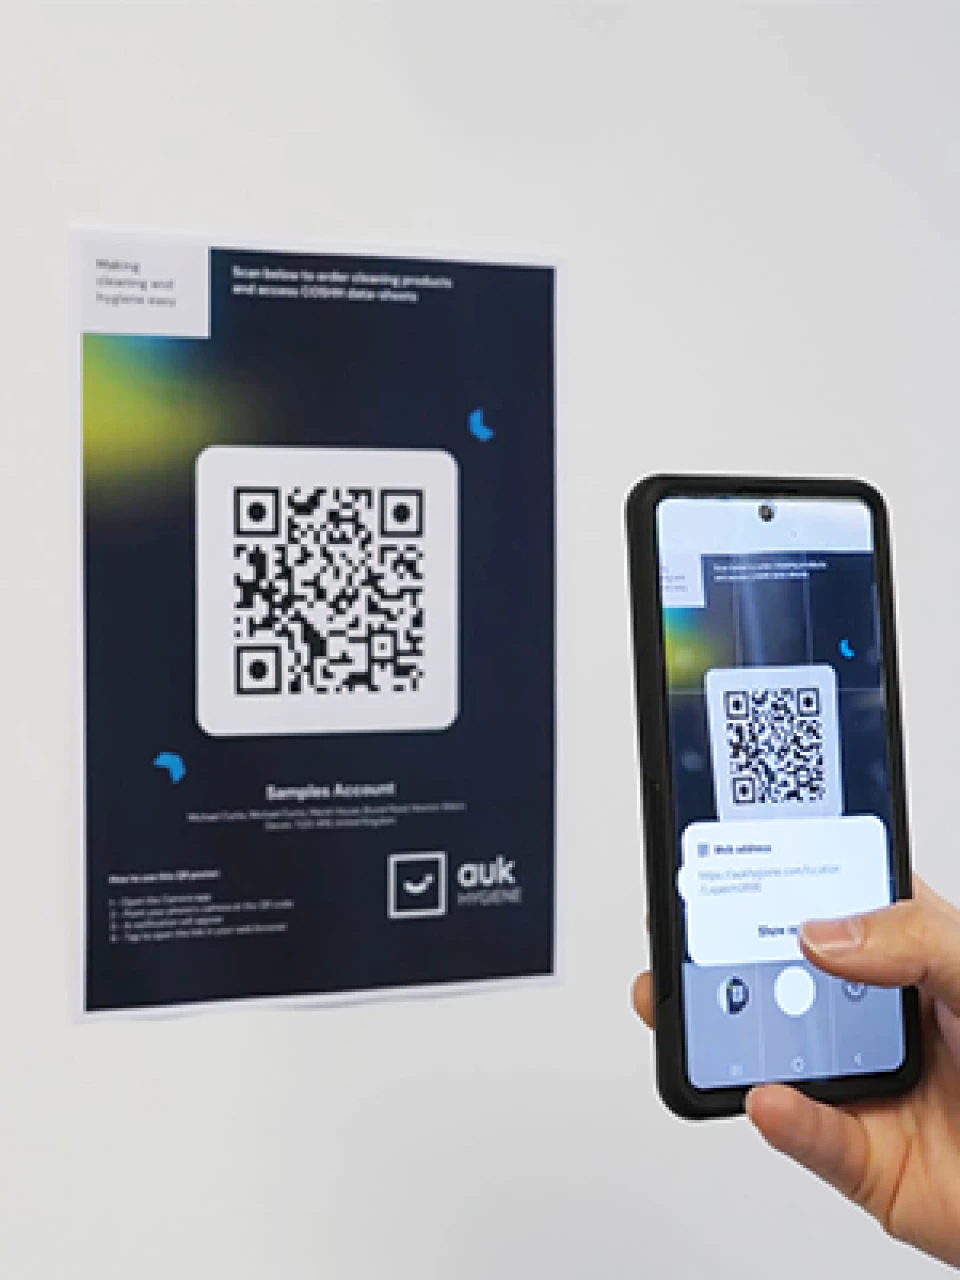 Fast & efficient ordering with 'Easy Access' - our unique QR code system